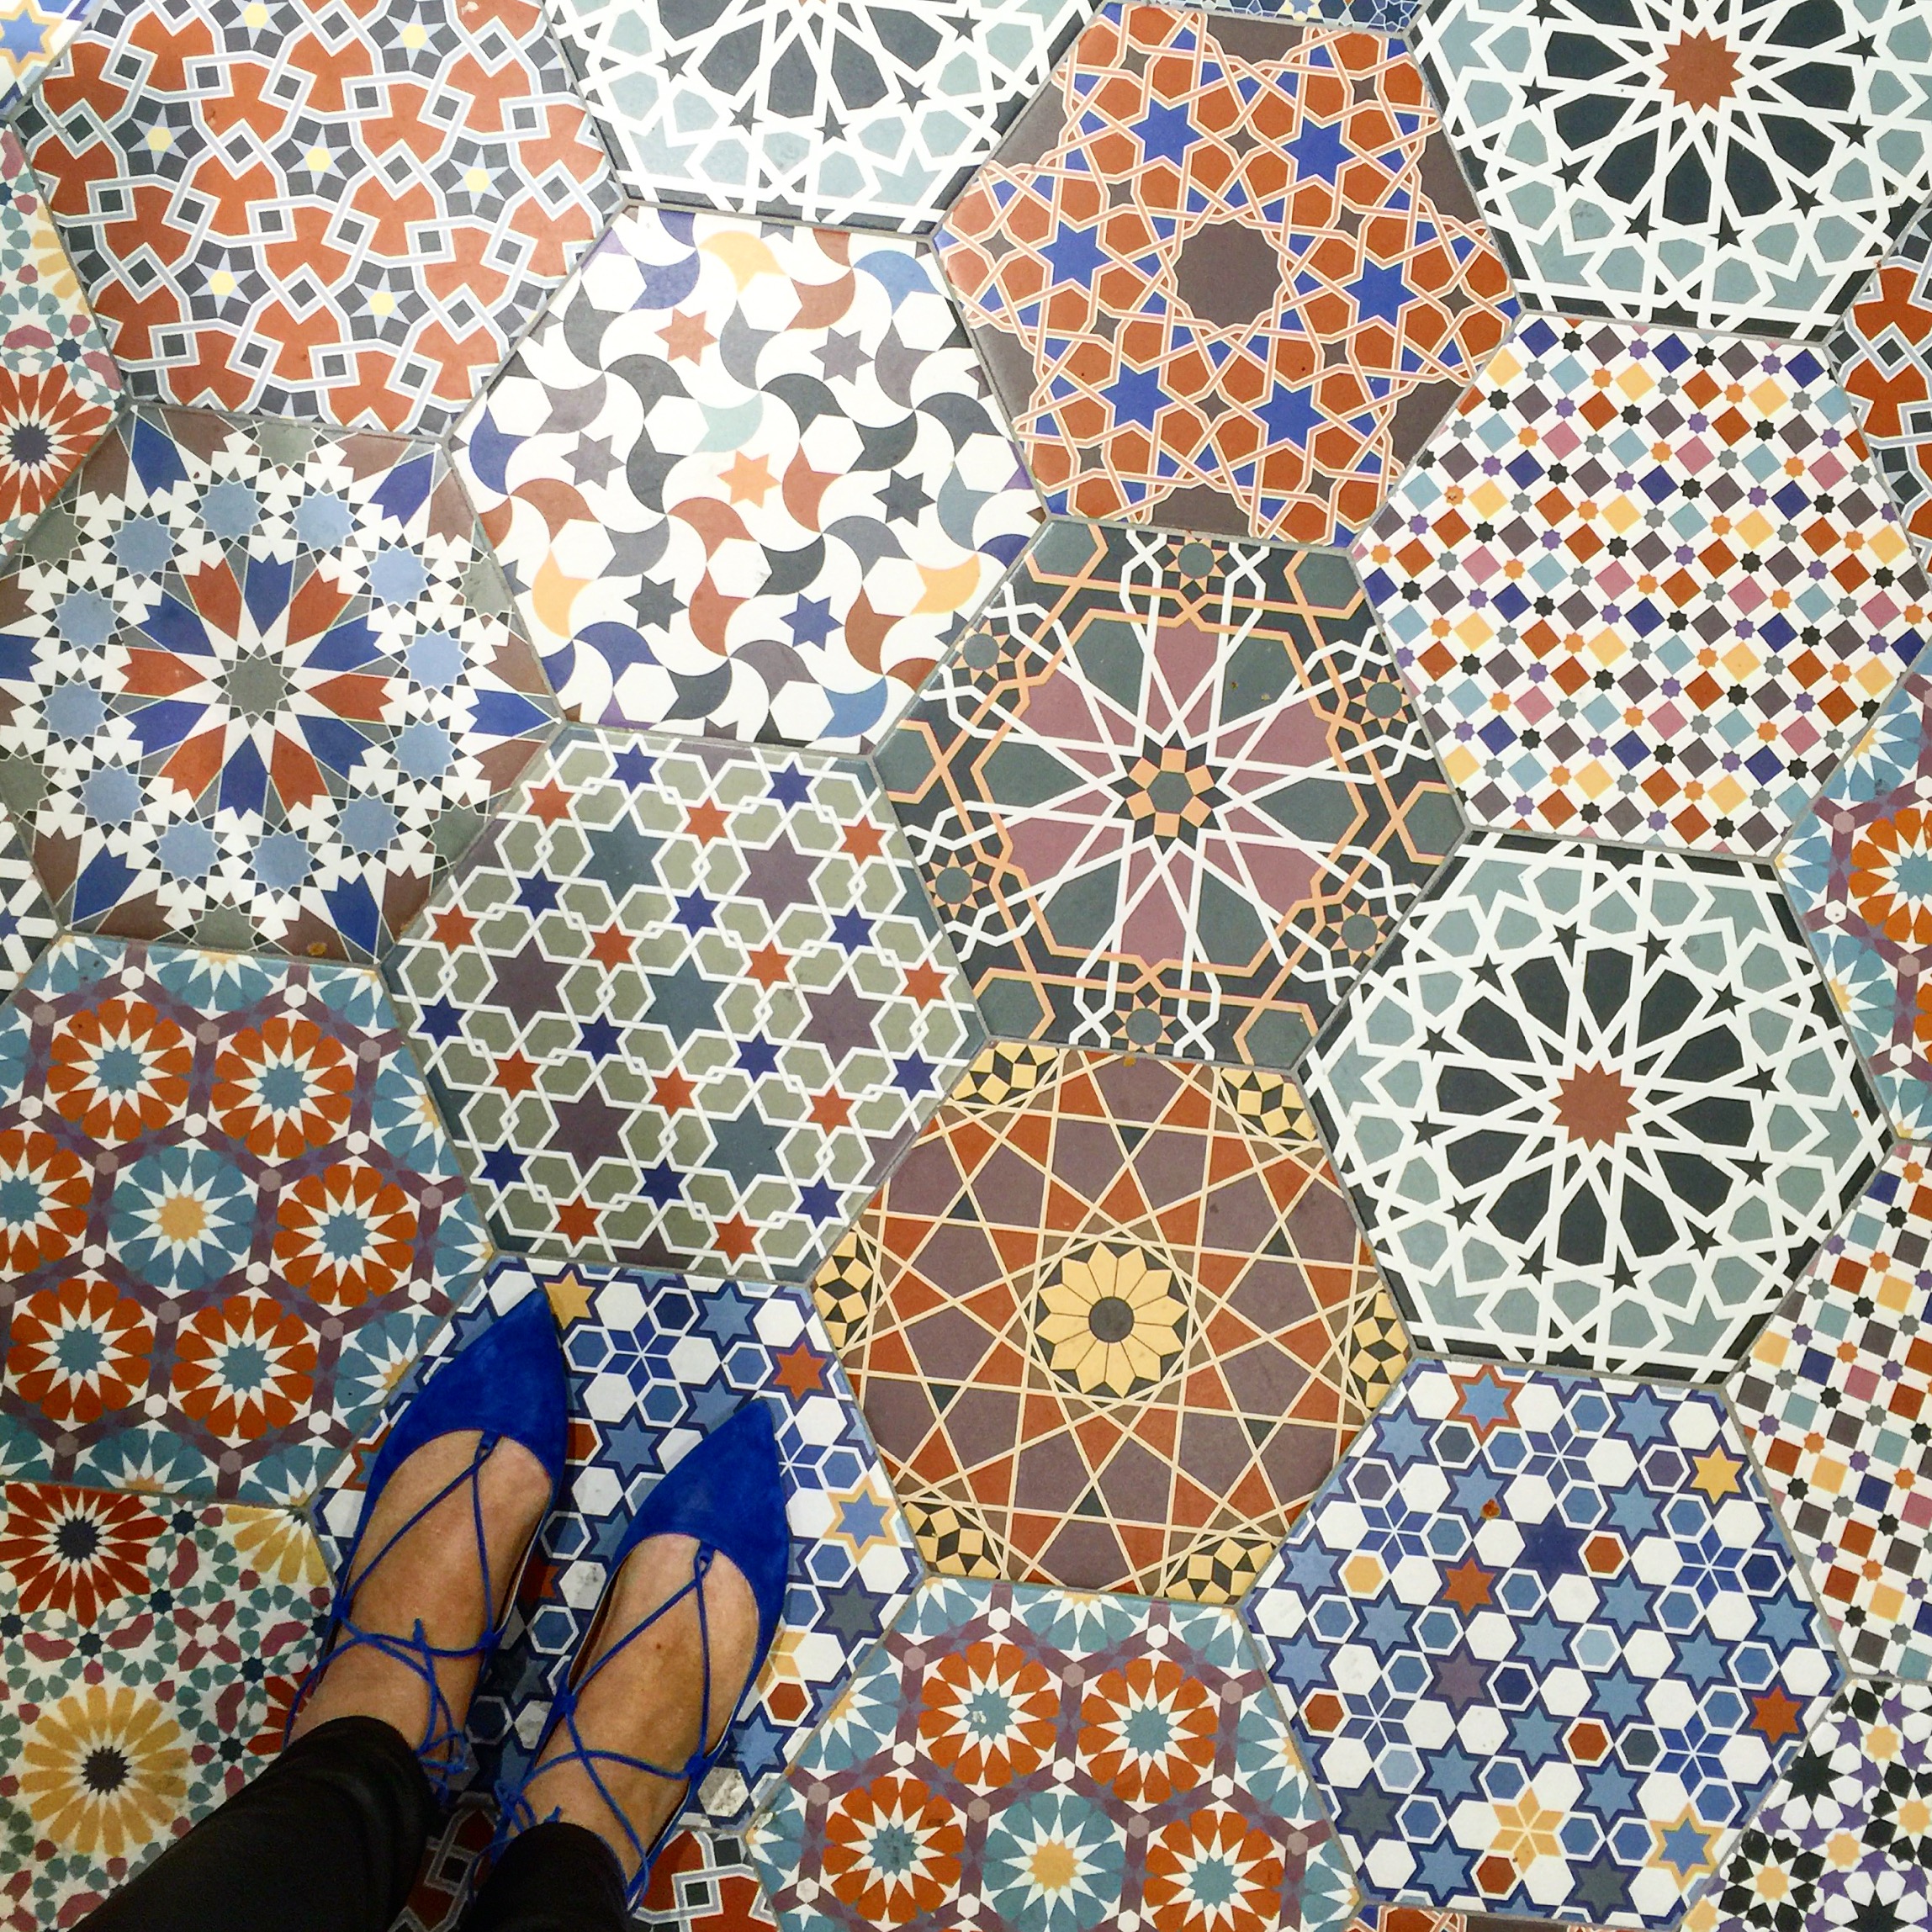 Spanish Tile for Miles at Cevisama: Part 2 | The English Room